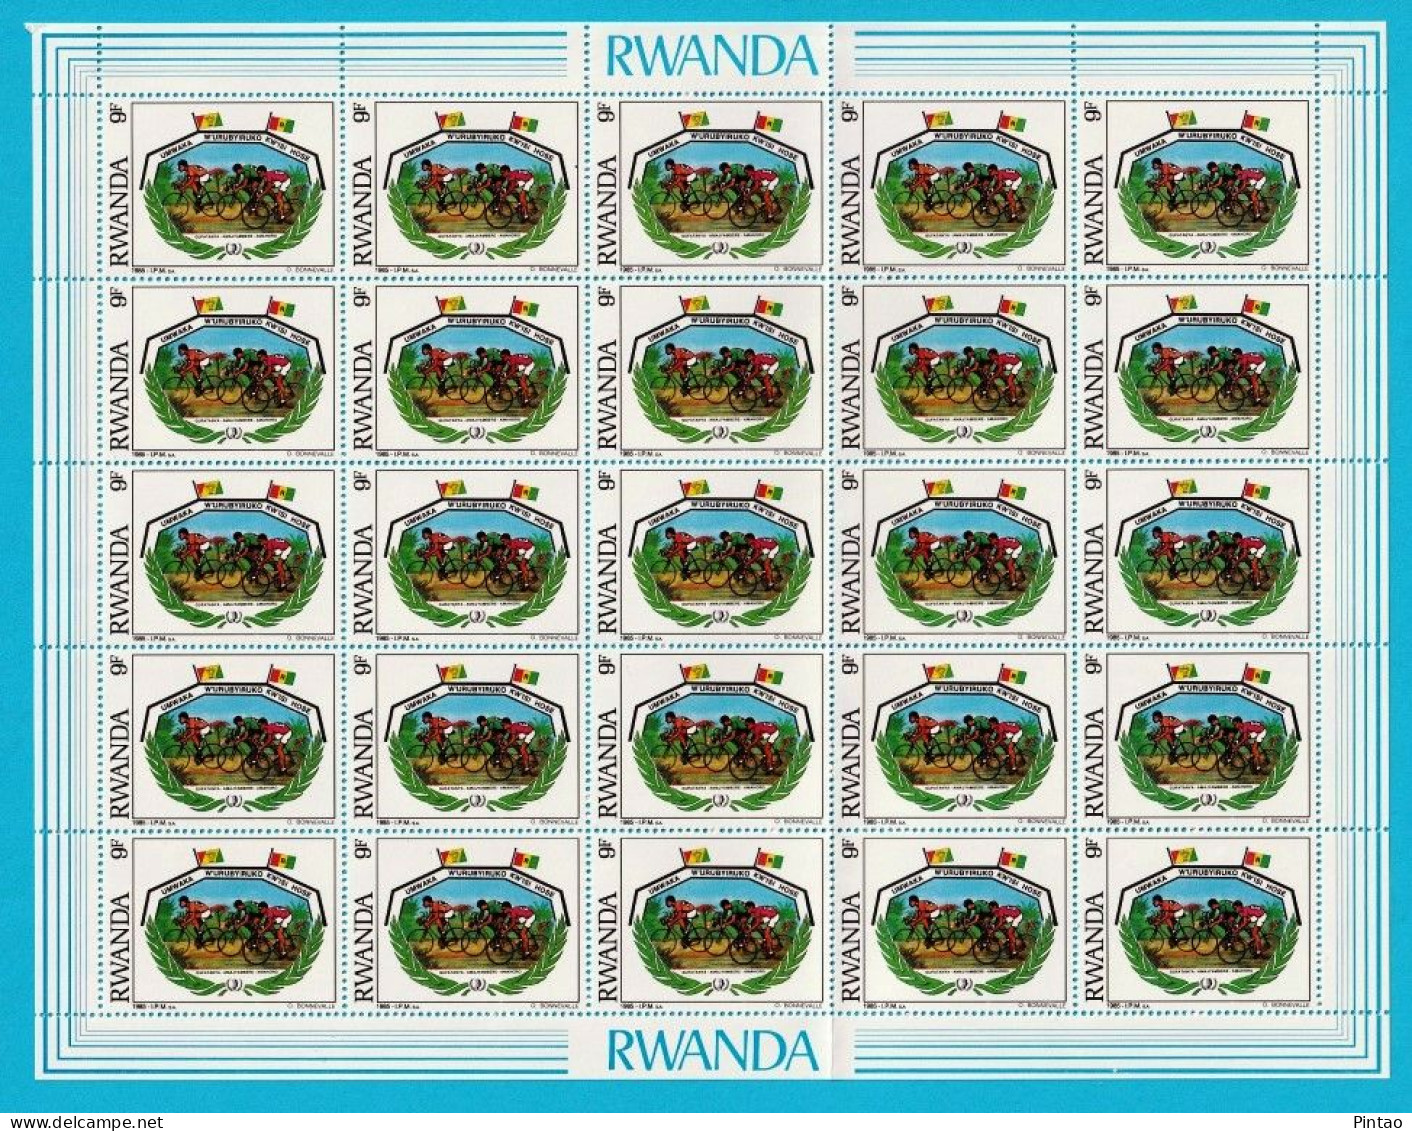 WW6972f- RUANDA 1985- MNH_ 4 FOLDED SHEETS / 25 ISSUES  /  100 STAMPS - Unused Stamps